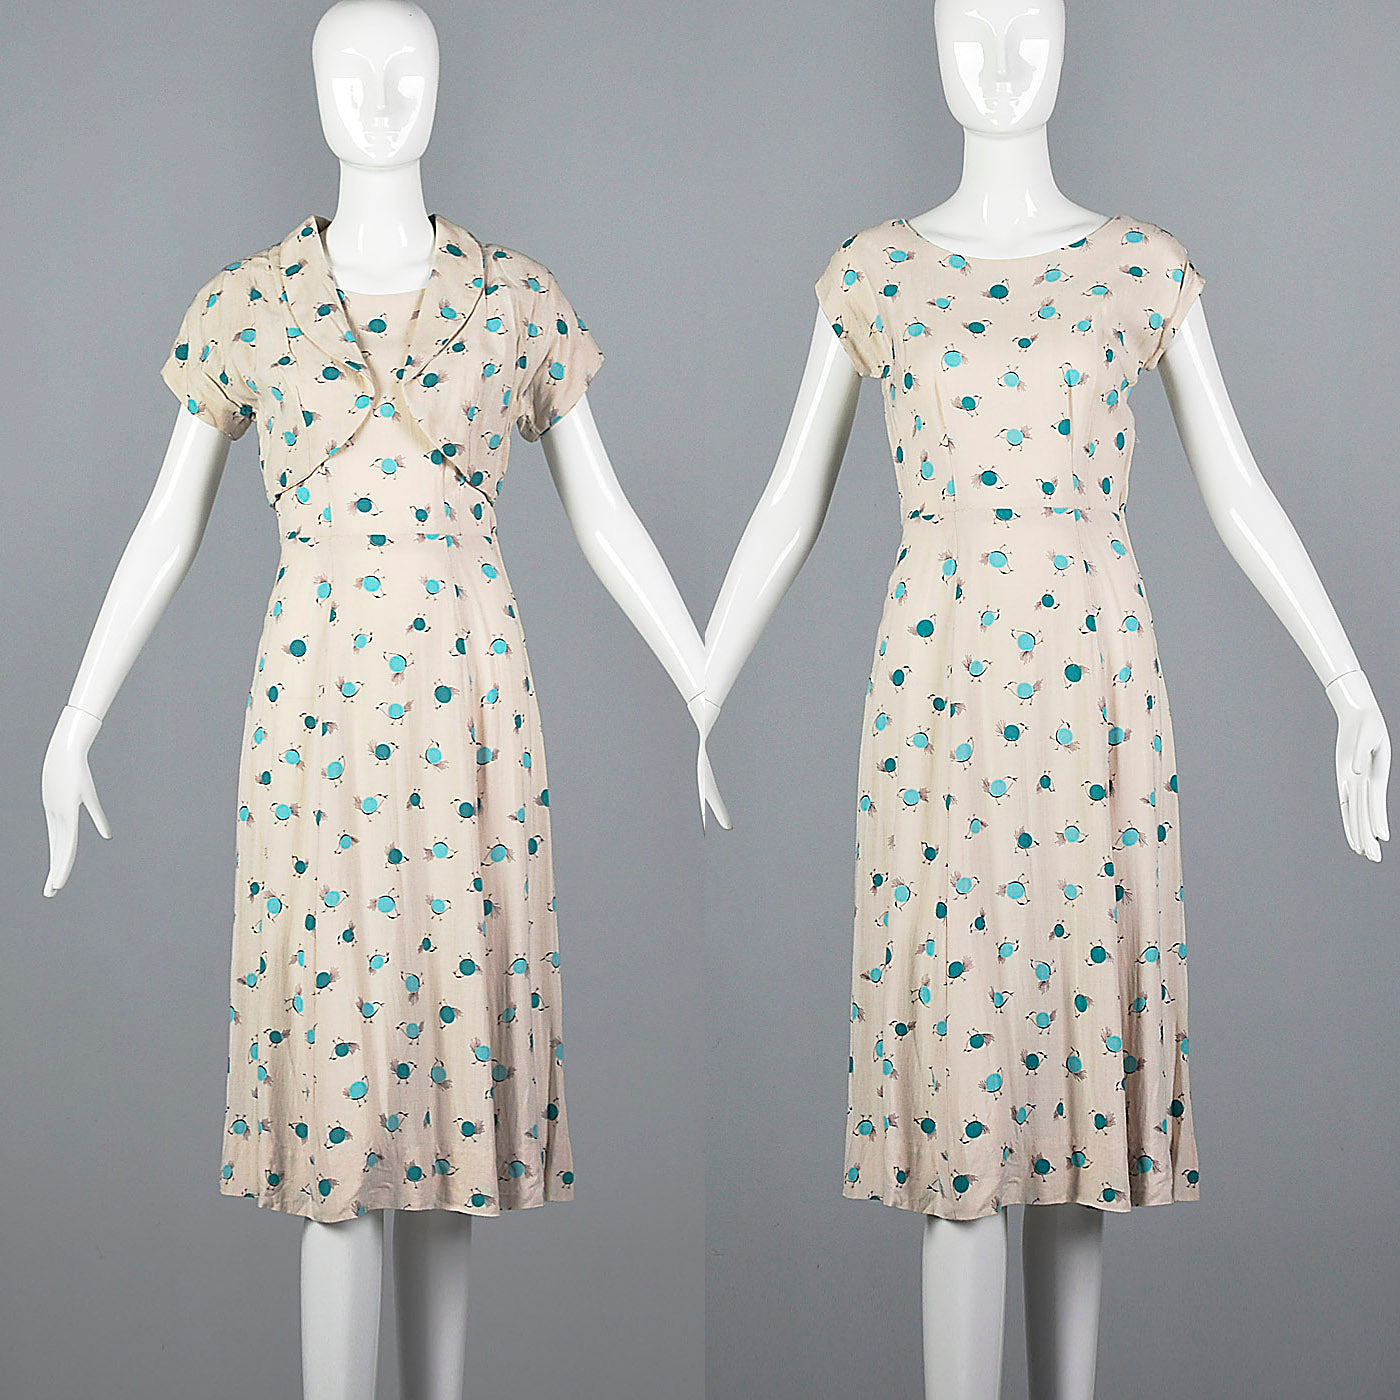 1950s Novelty Print Dress with Abstract Blue Birds